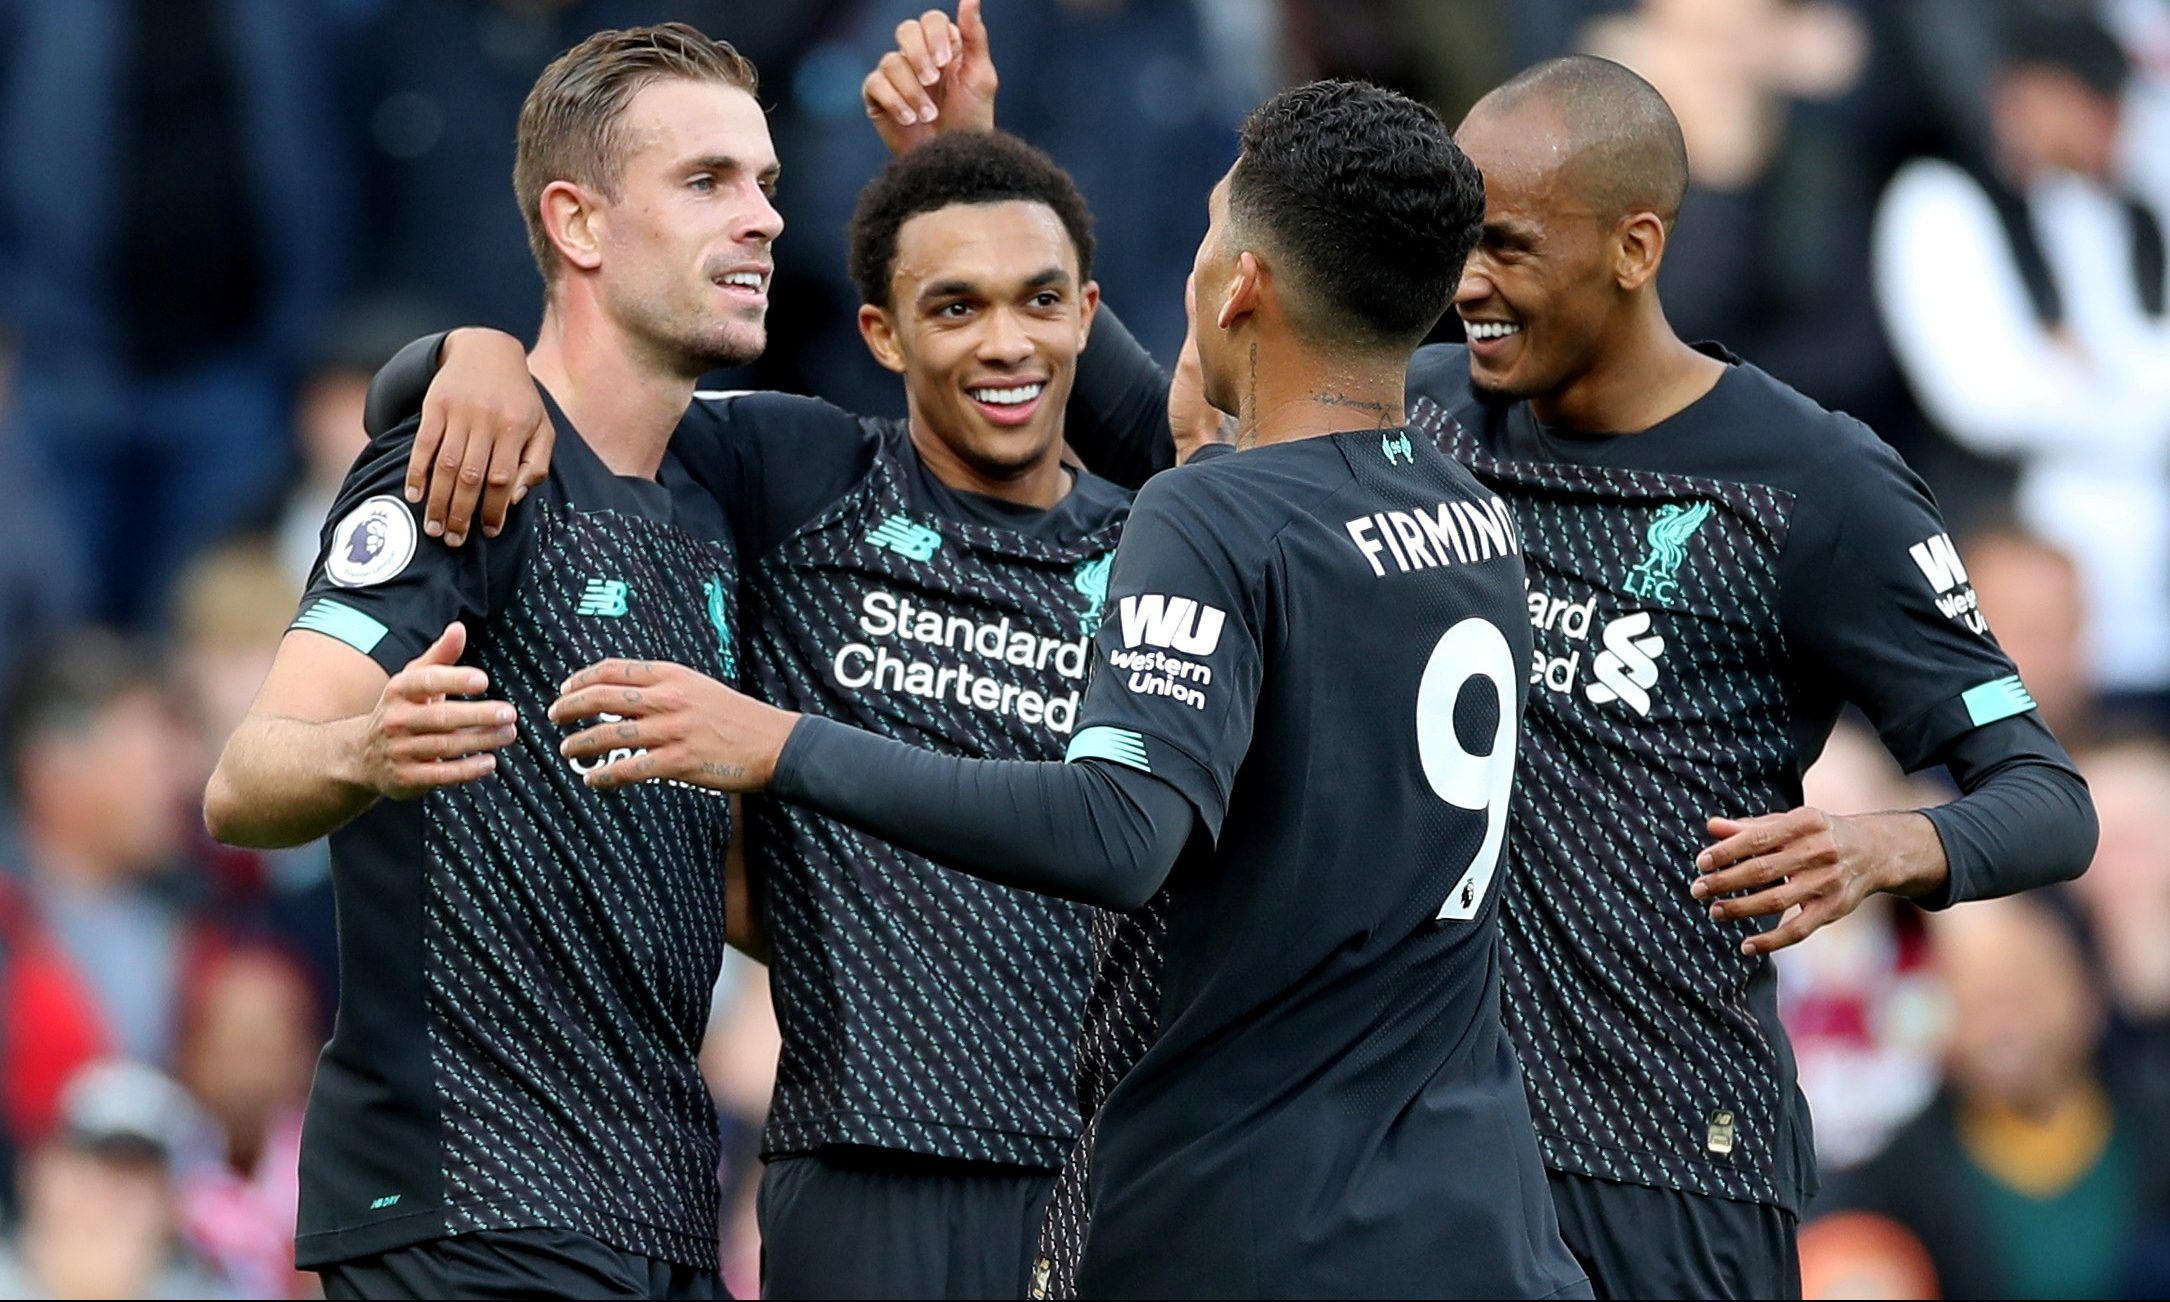 Soccer Football - Premier League - Burnley v Liverpool - Turf Moor, Burnley, Britain - August 31, 2019  Liverpool's Trent Alexander-Arnold celebrates scoring their first goal with Jordan Henderson and team mates  Action Images via Reuters/Carl Recine  EDITORIAL USE ONLY. No use with unauthorized audio, video, data, fixture lists, club/league logos or 